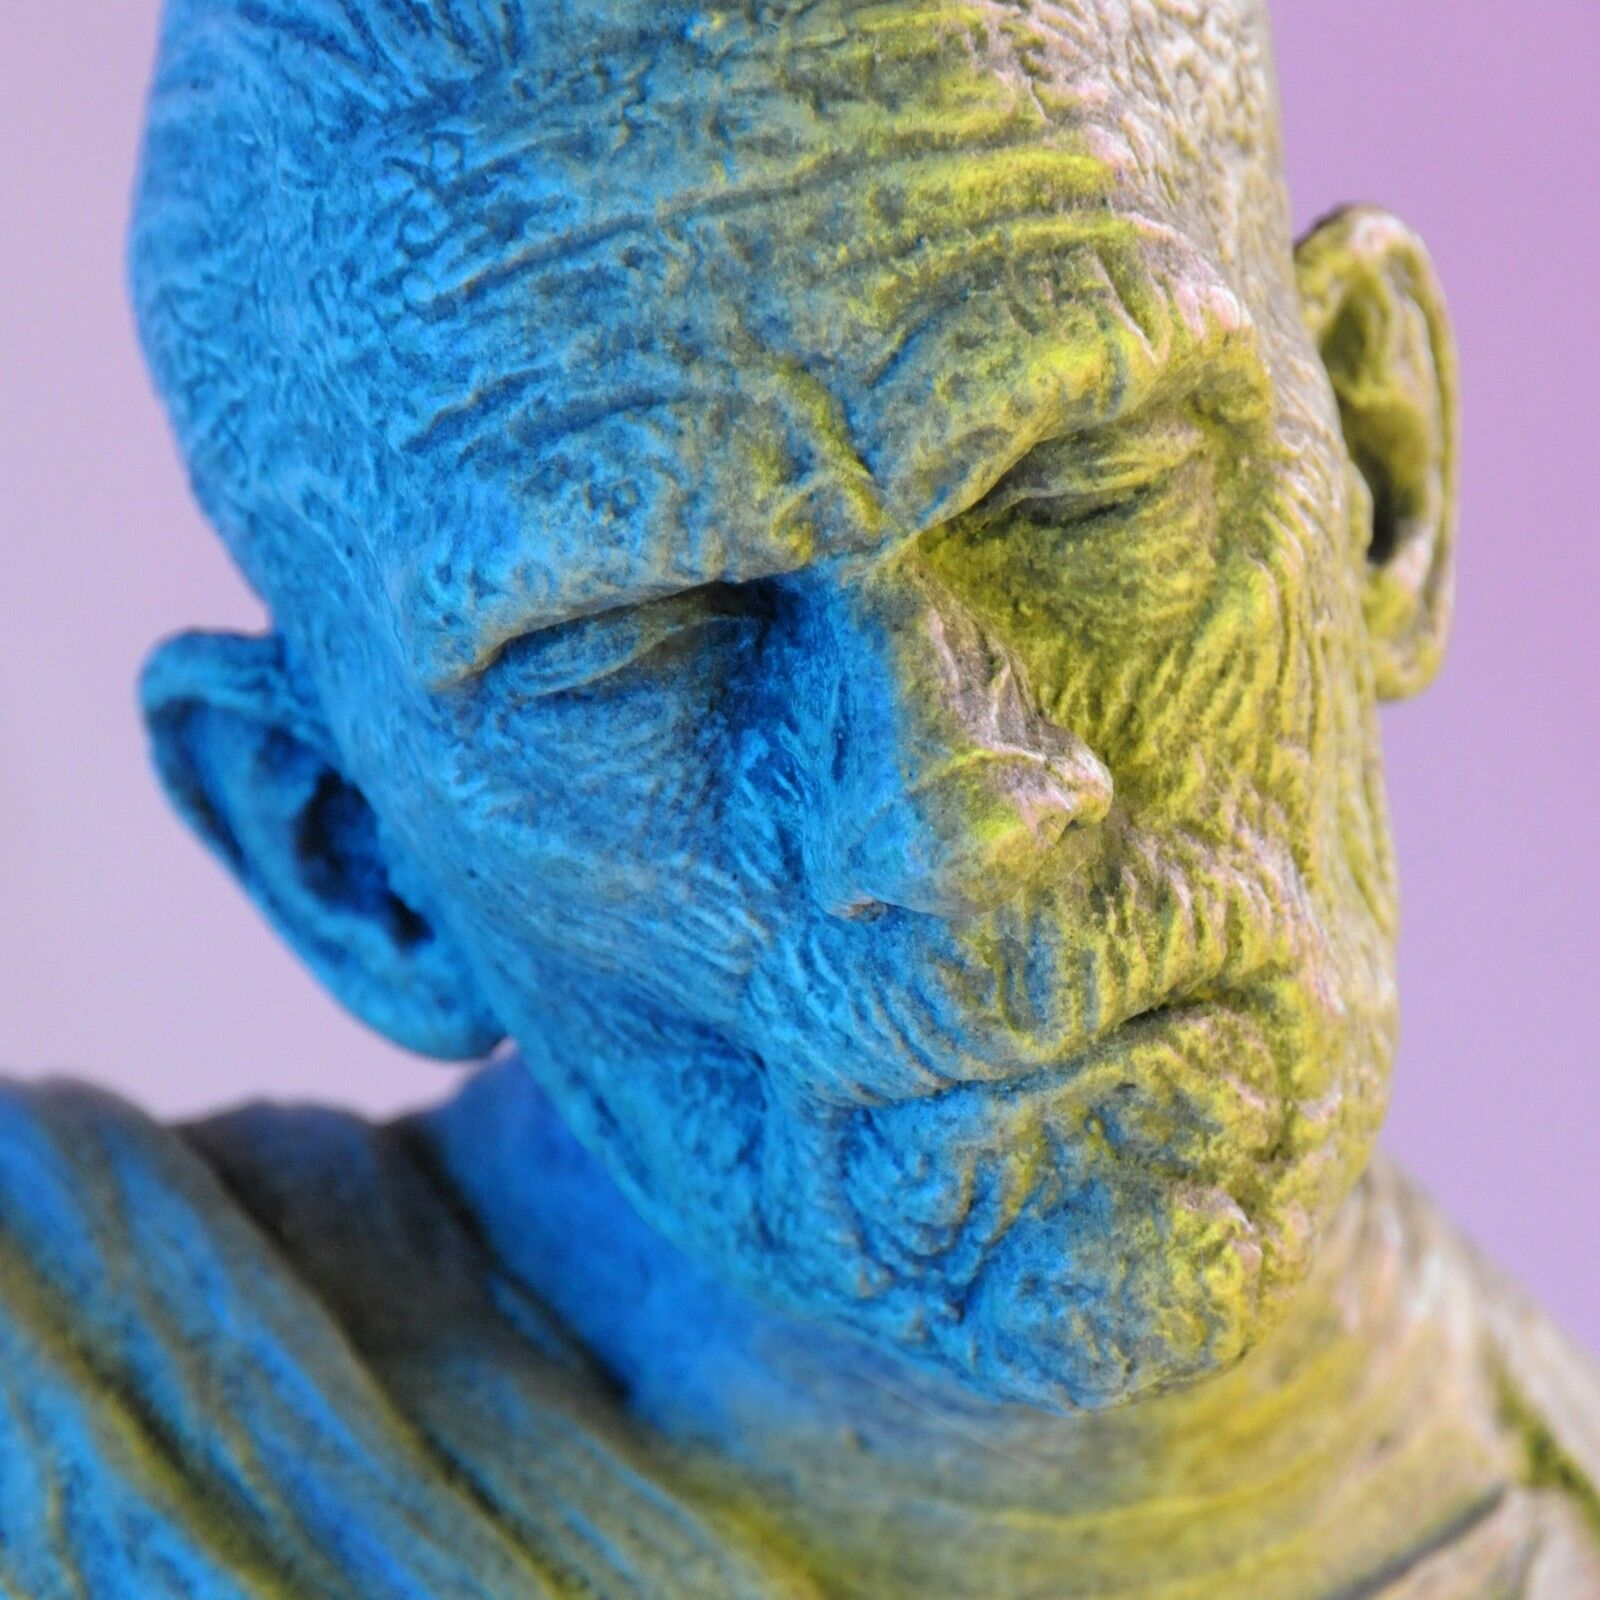 Boris Karloff as ”The Mummy” – Limited Edition Bronze by Mike Hill